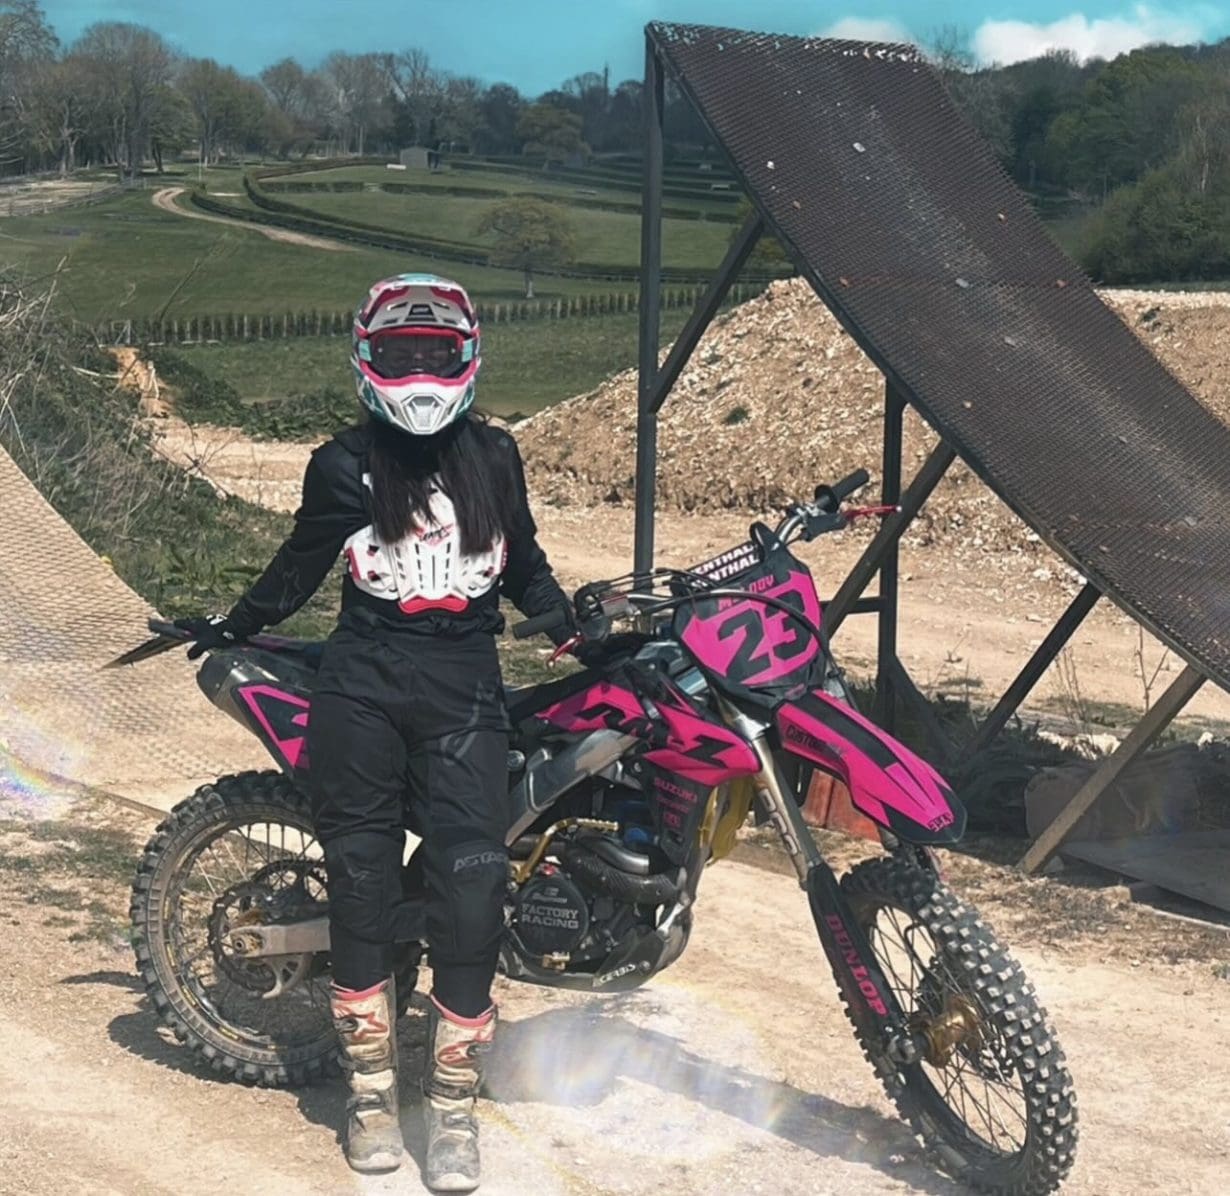 Melody and her pink RMZ